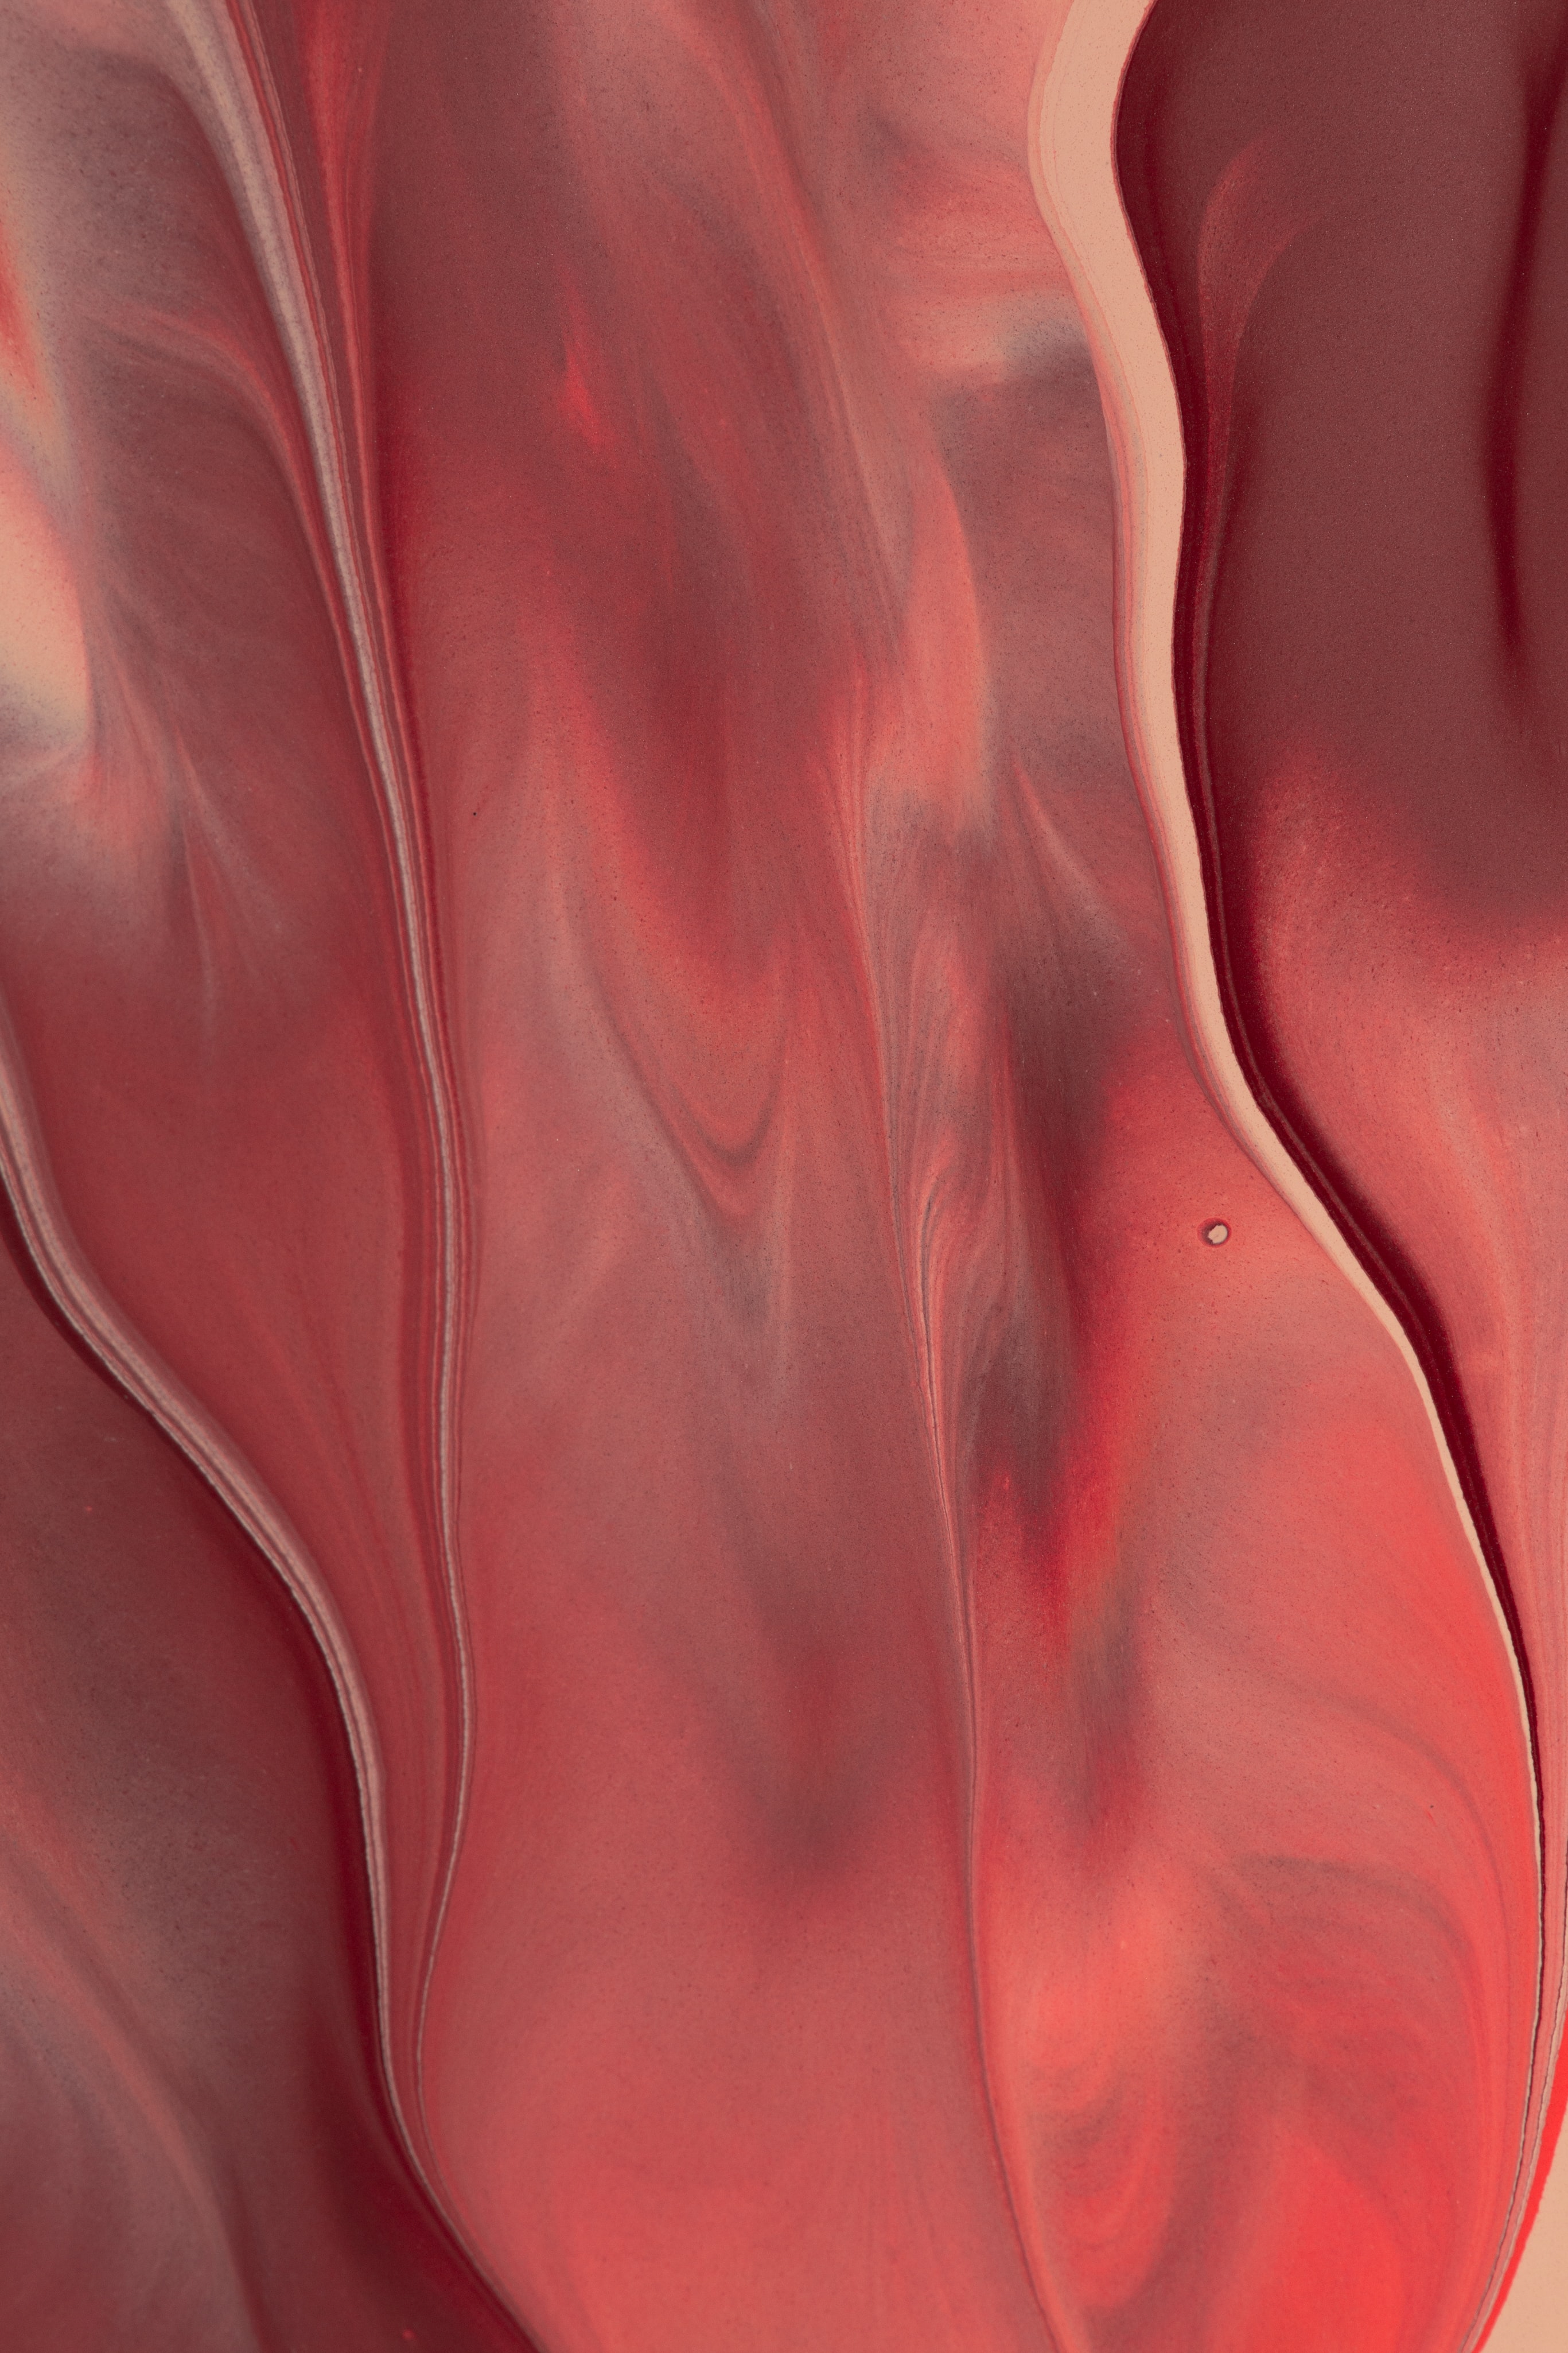 liquid, paint, red, abstract, divorces HD wallpaper